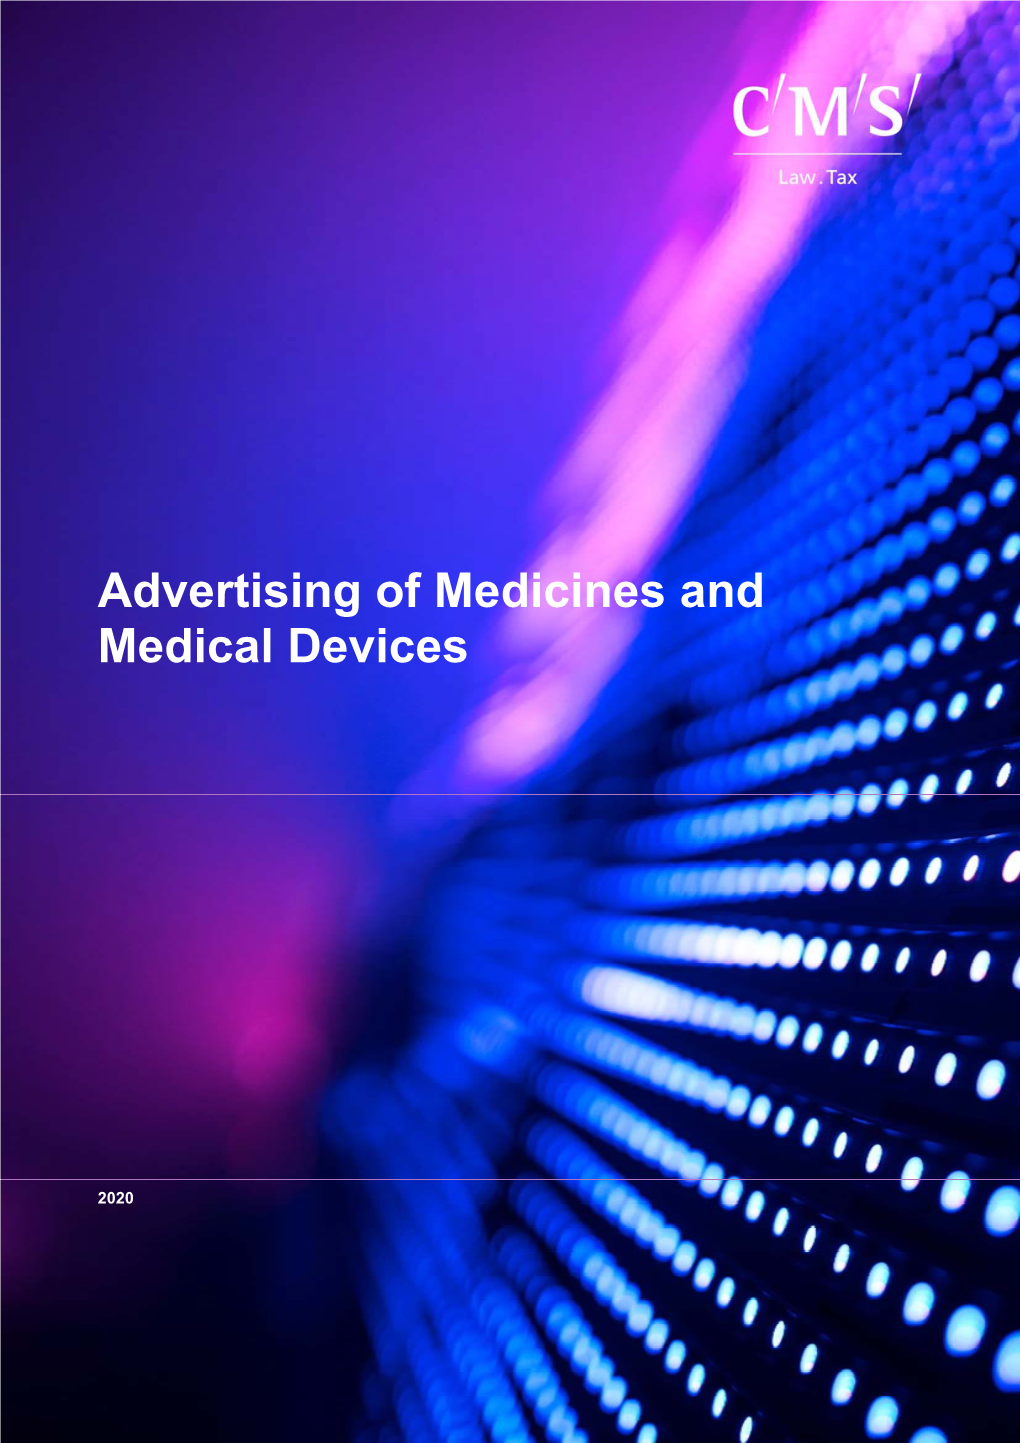 Advertising of Medicines and Medical Devices